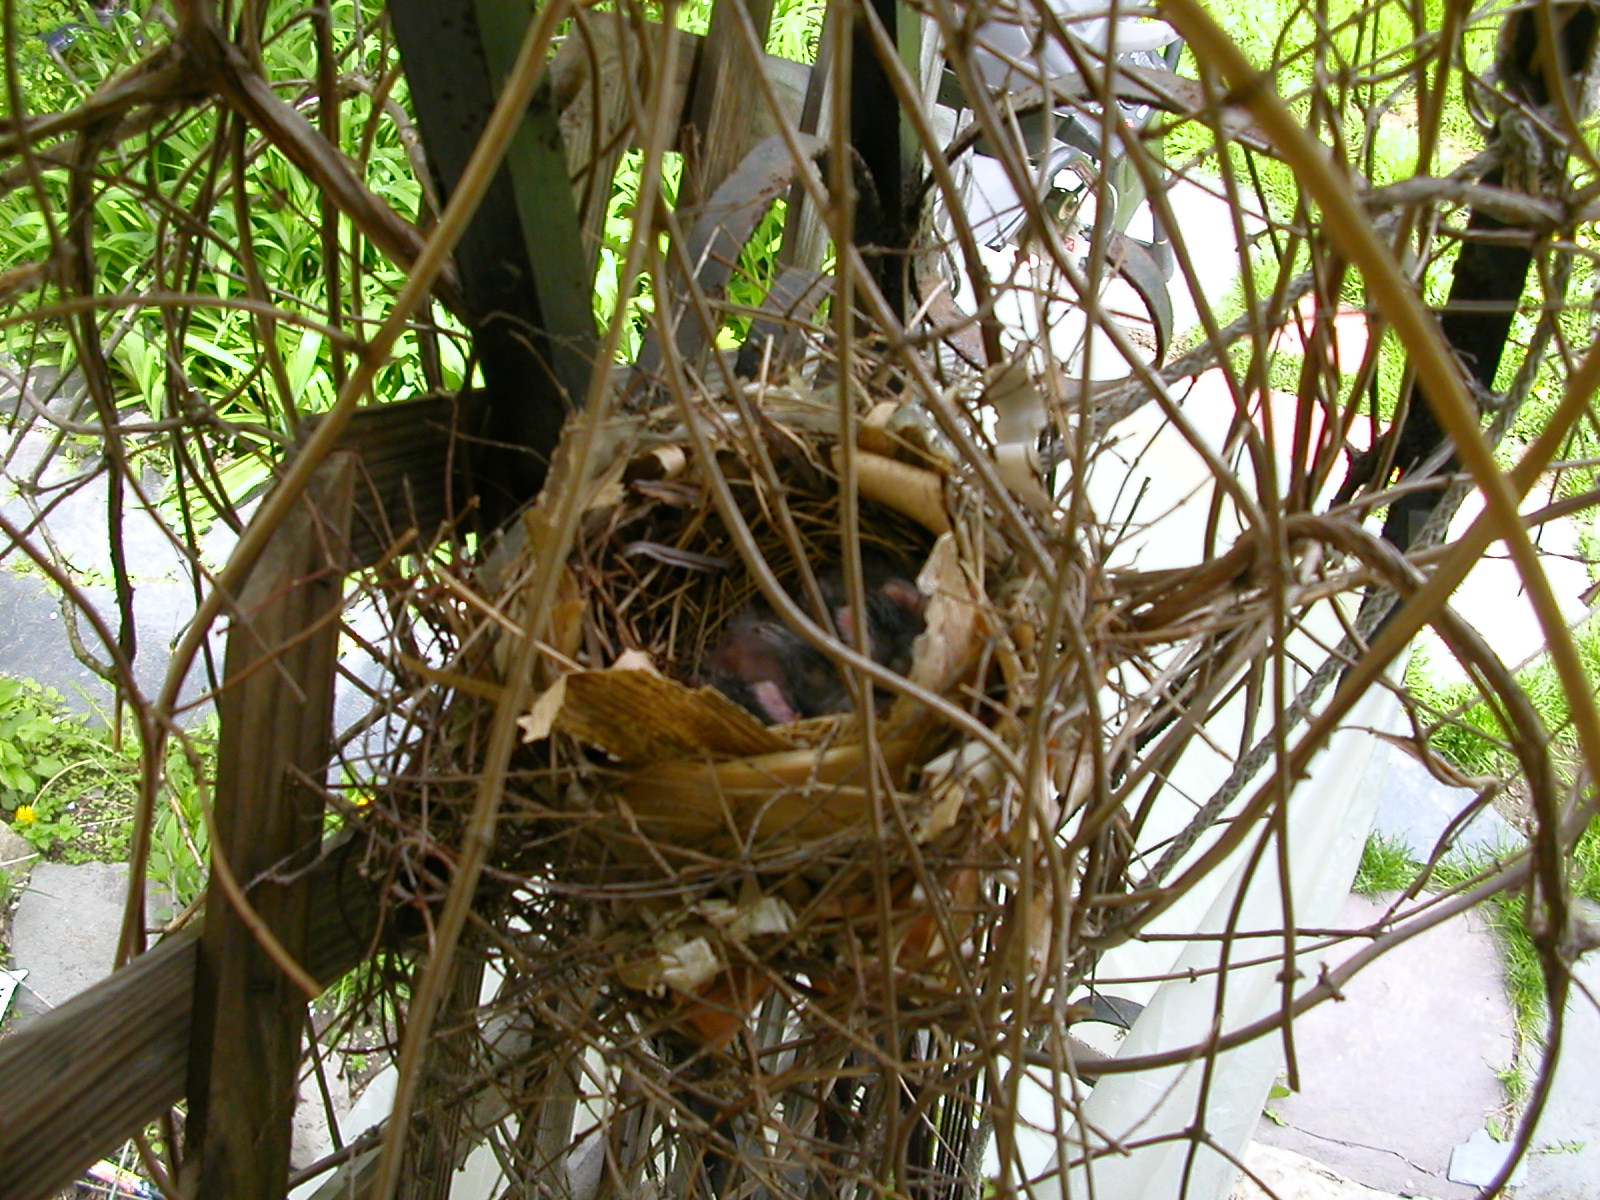 a bird's nest with several birds on it